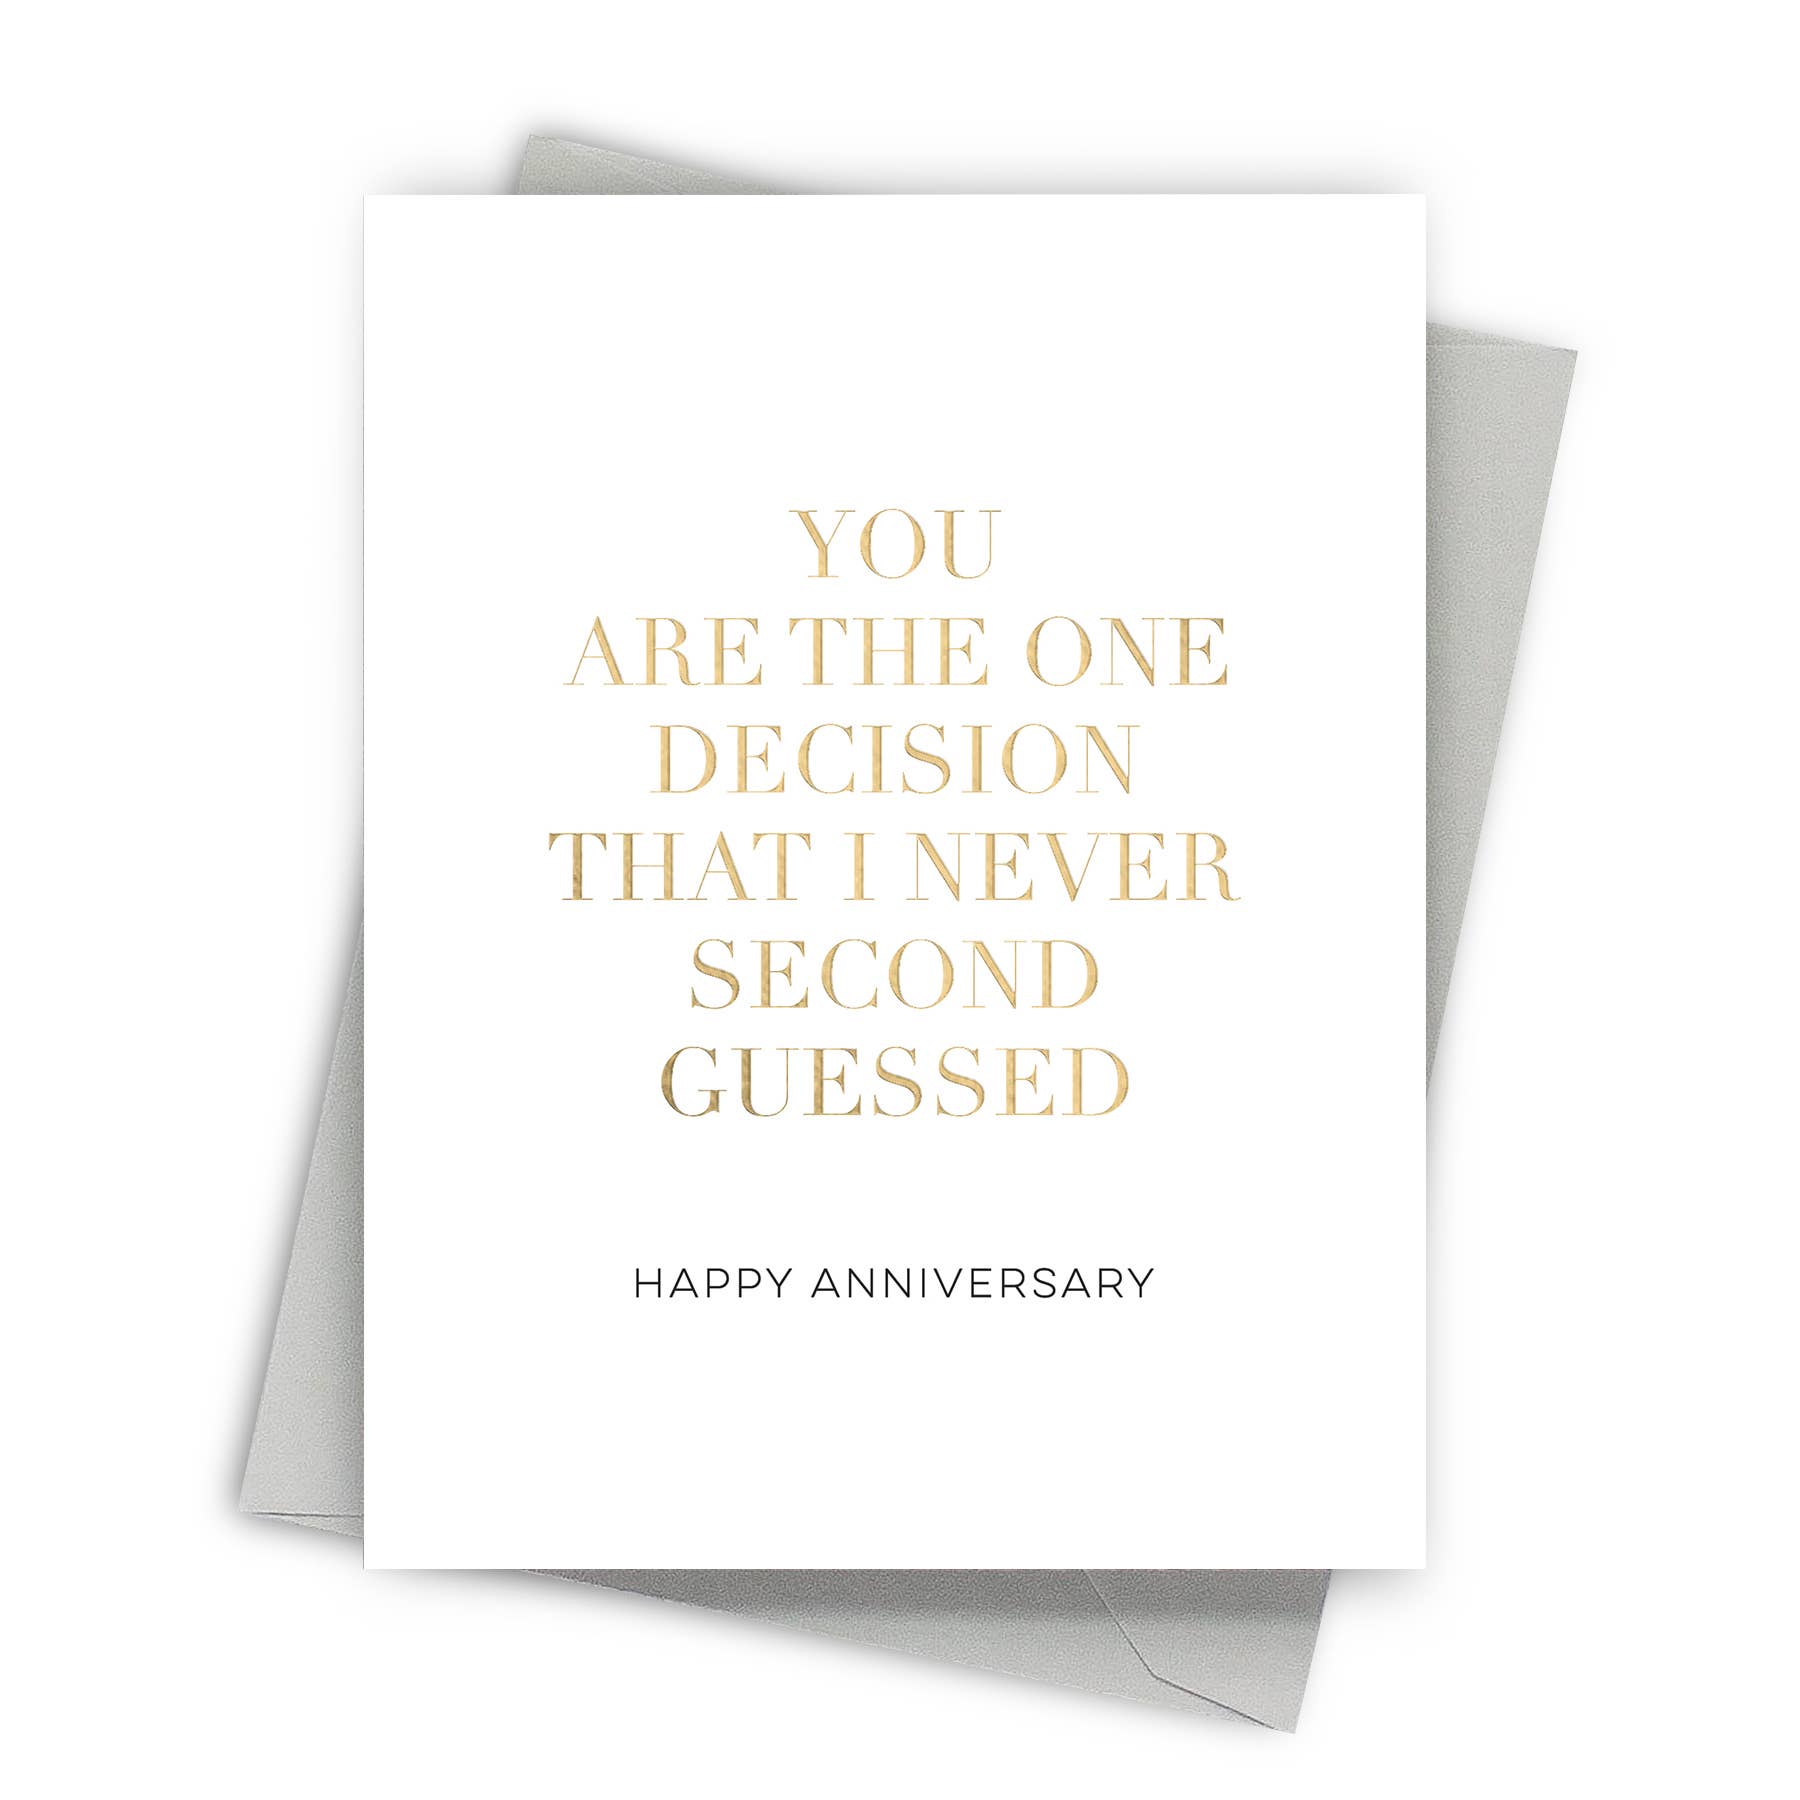 Second Guesses – Sweet Anniversary Card